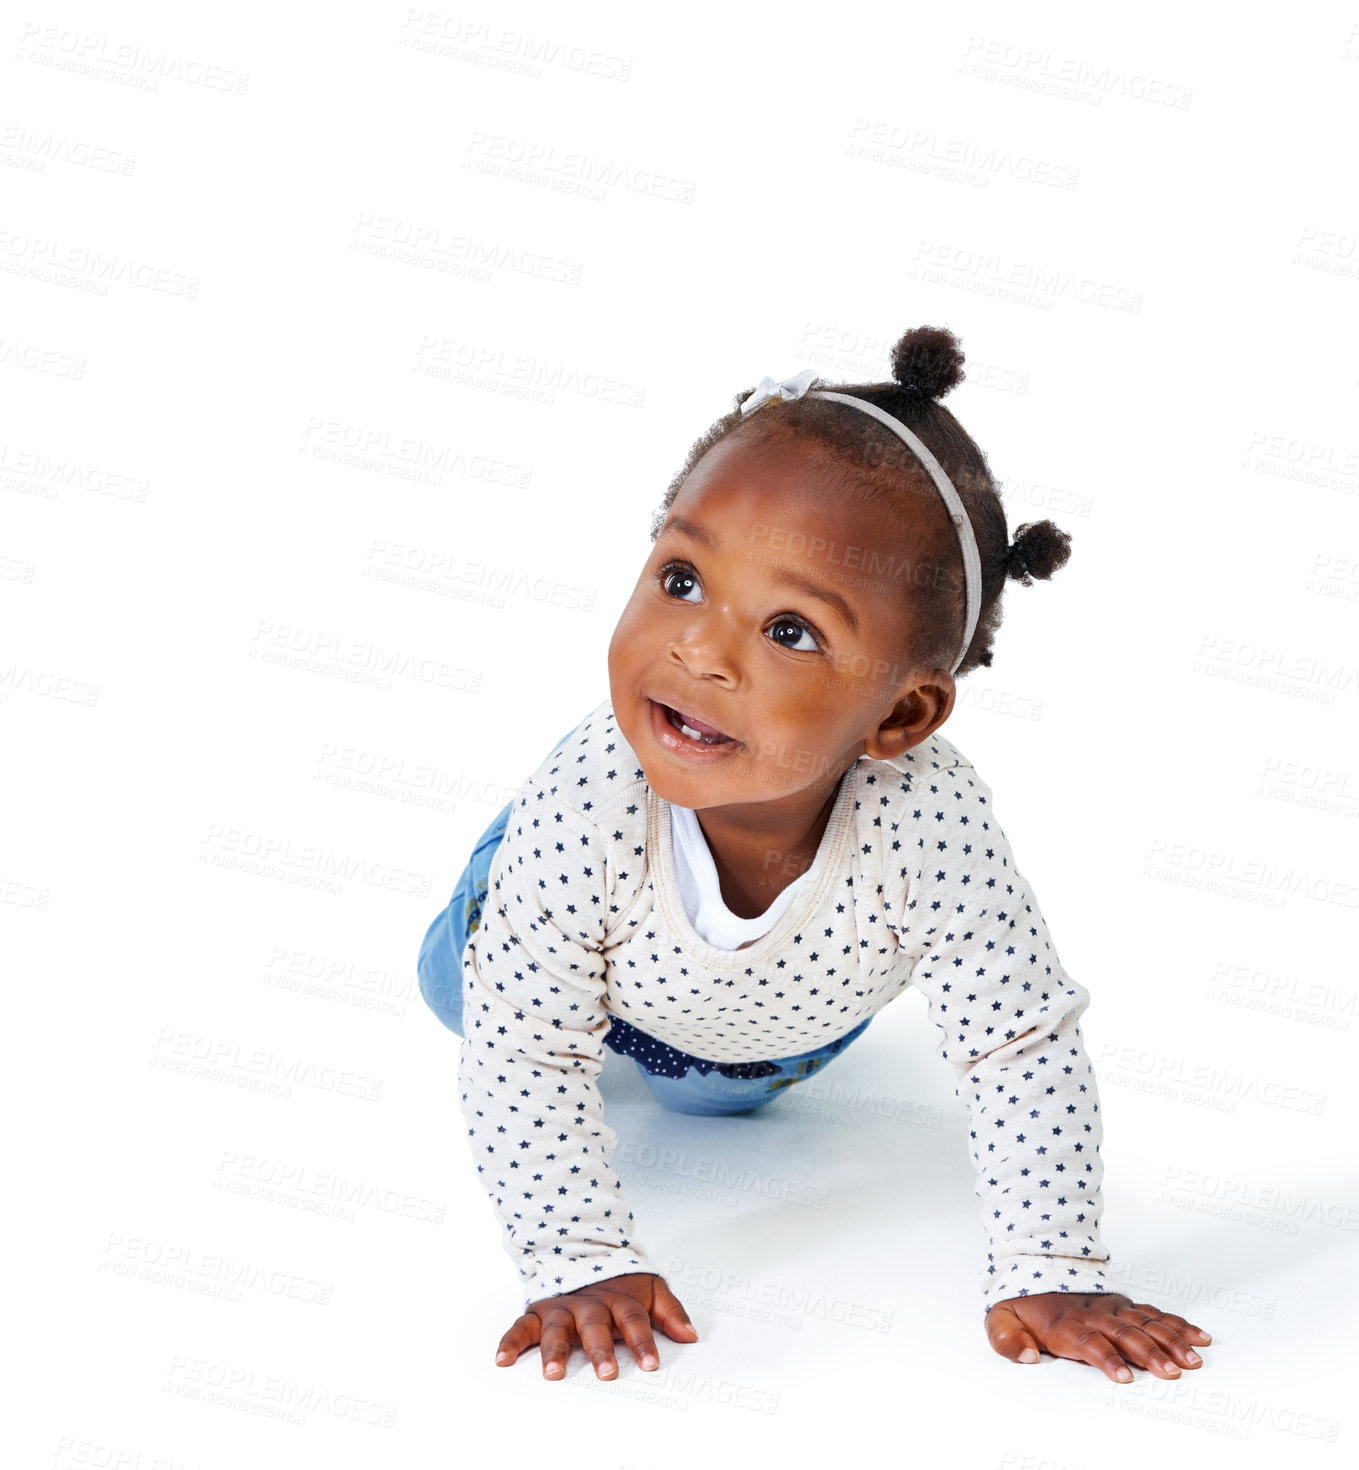 Buy stock photo Baby, girl or crawling by thinking, curiosity or wow as question, idea or wonder at balance progress. Female toddler, hands or knees in vision to learn, motor skills or mobility development milestone